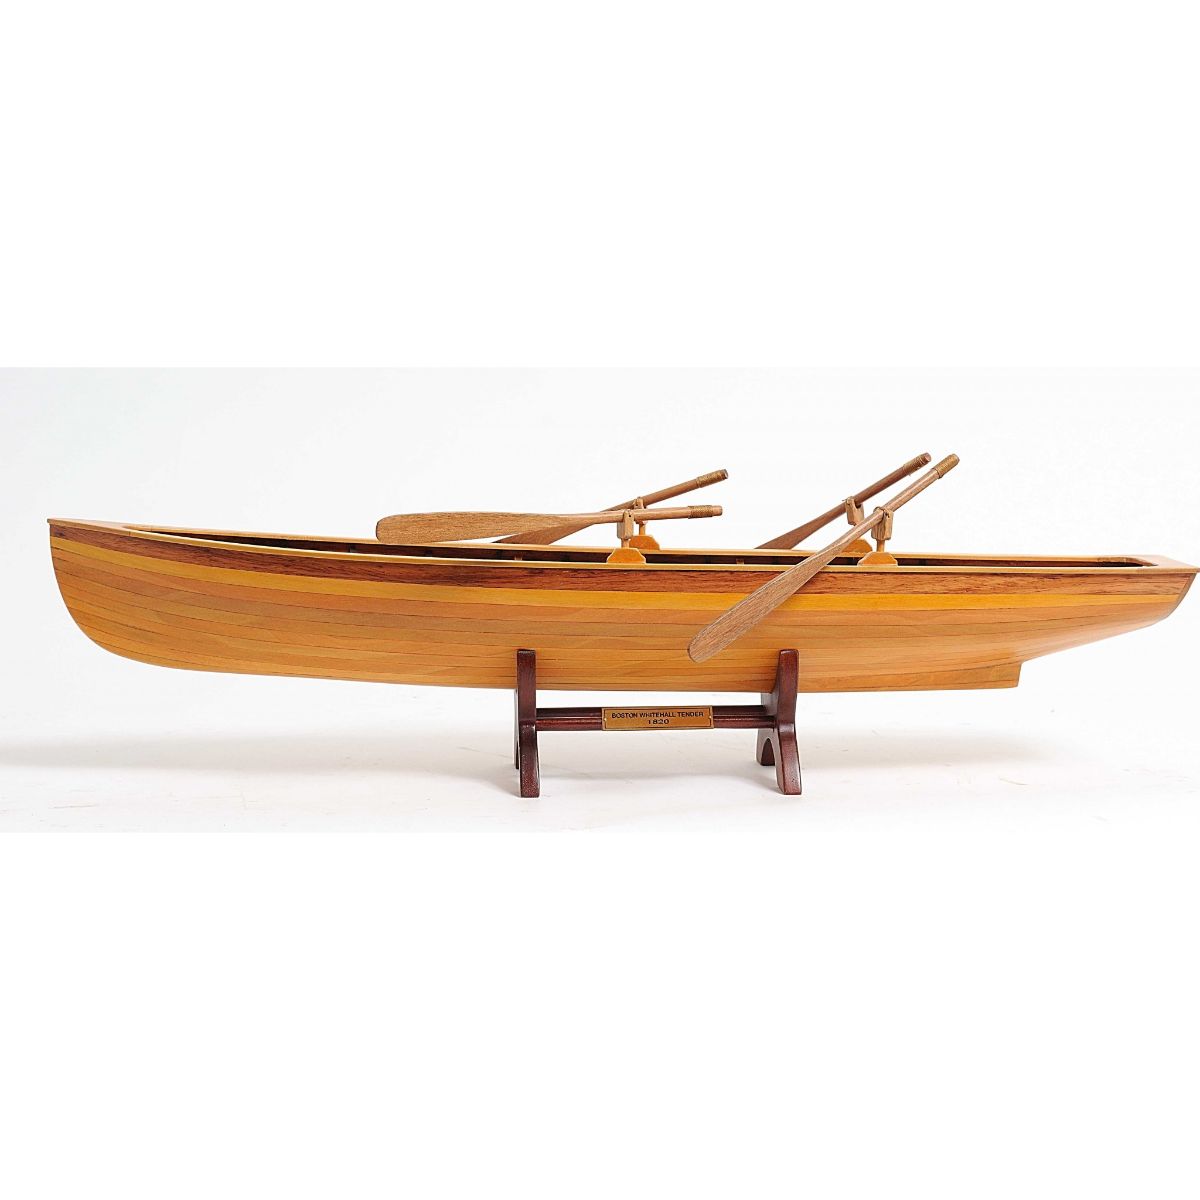 HomeRoots Wooden Boat Model with Interior Ribs, Oars, and Brass